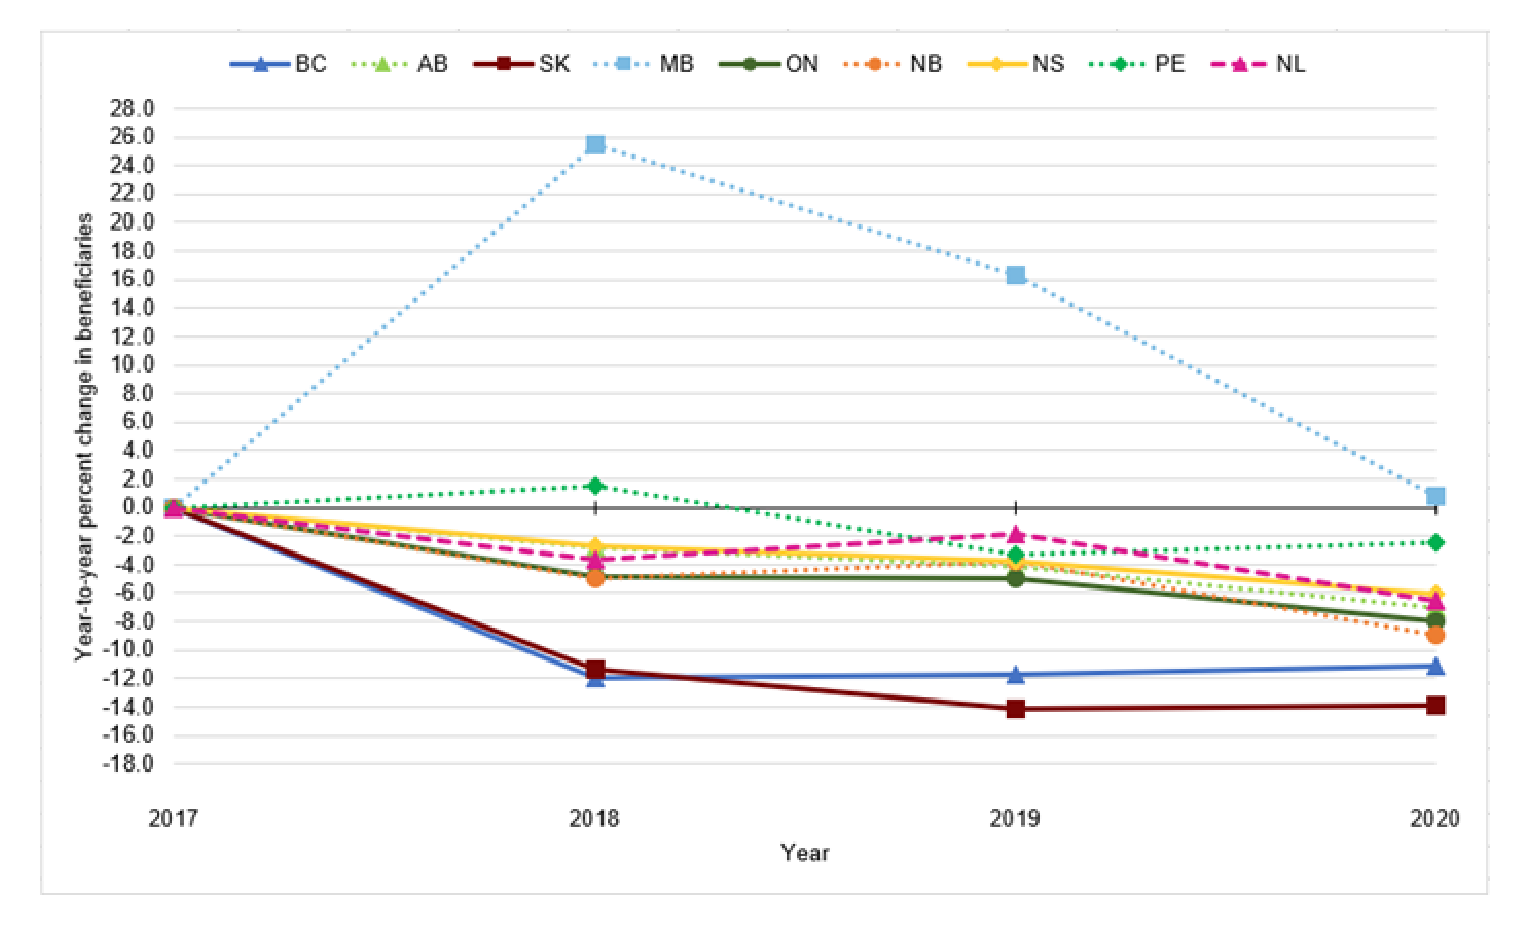 Line graph showing the percent change in beneficiaries by year for all drugs from 2017 to 2020 by province. All provinces showed year-to-year decreases in the total number of beneficiaries except Manitoba, which had an increase in beneficiaries.